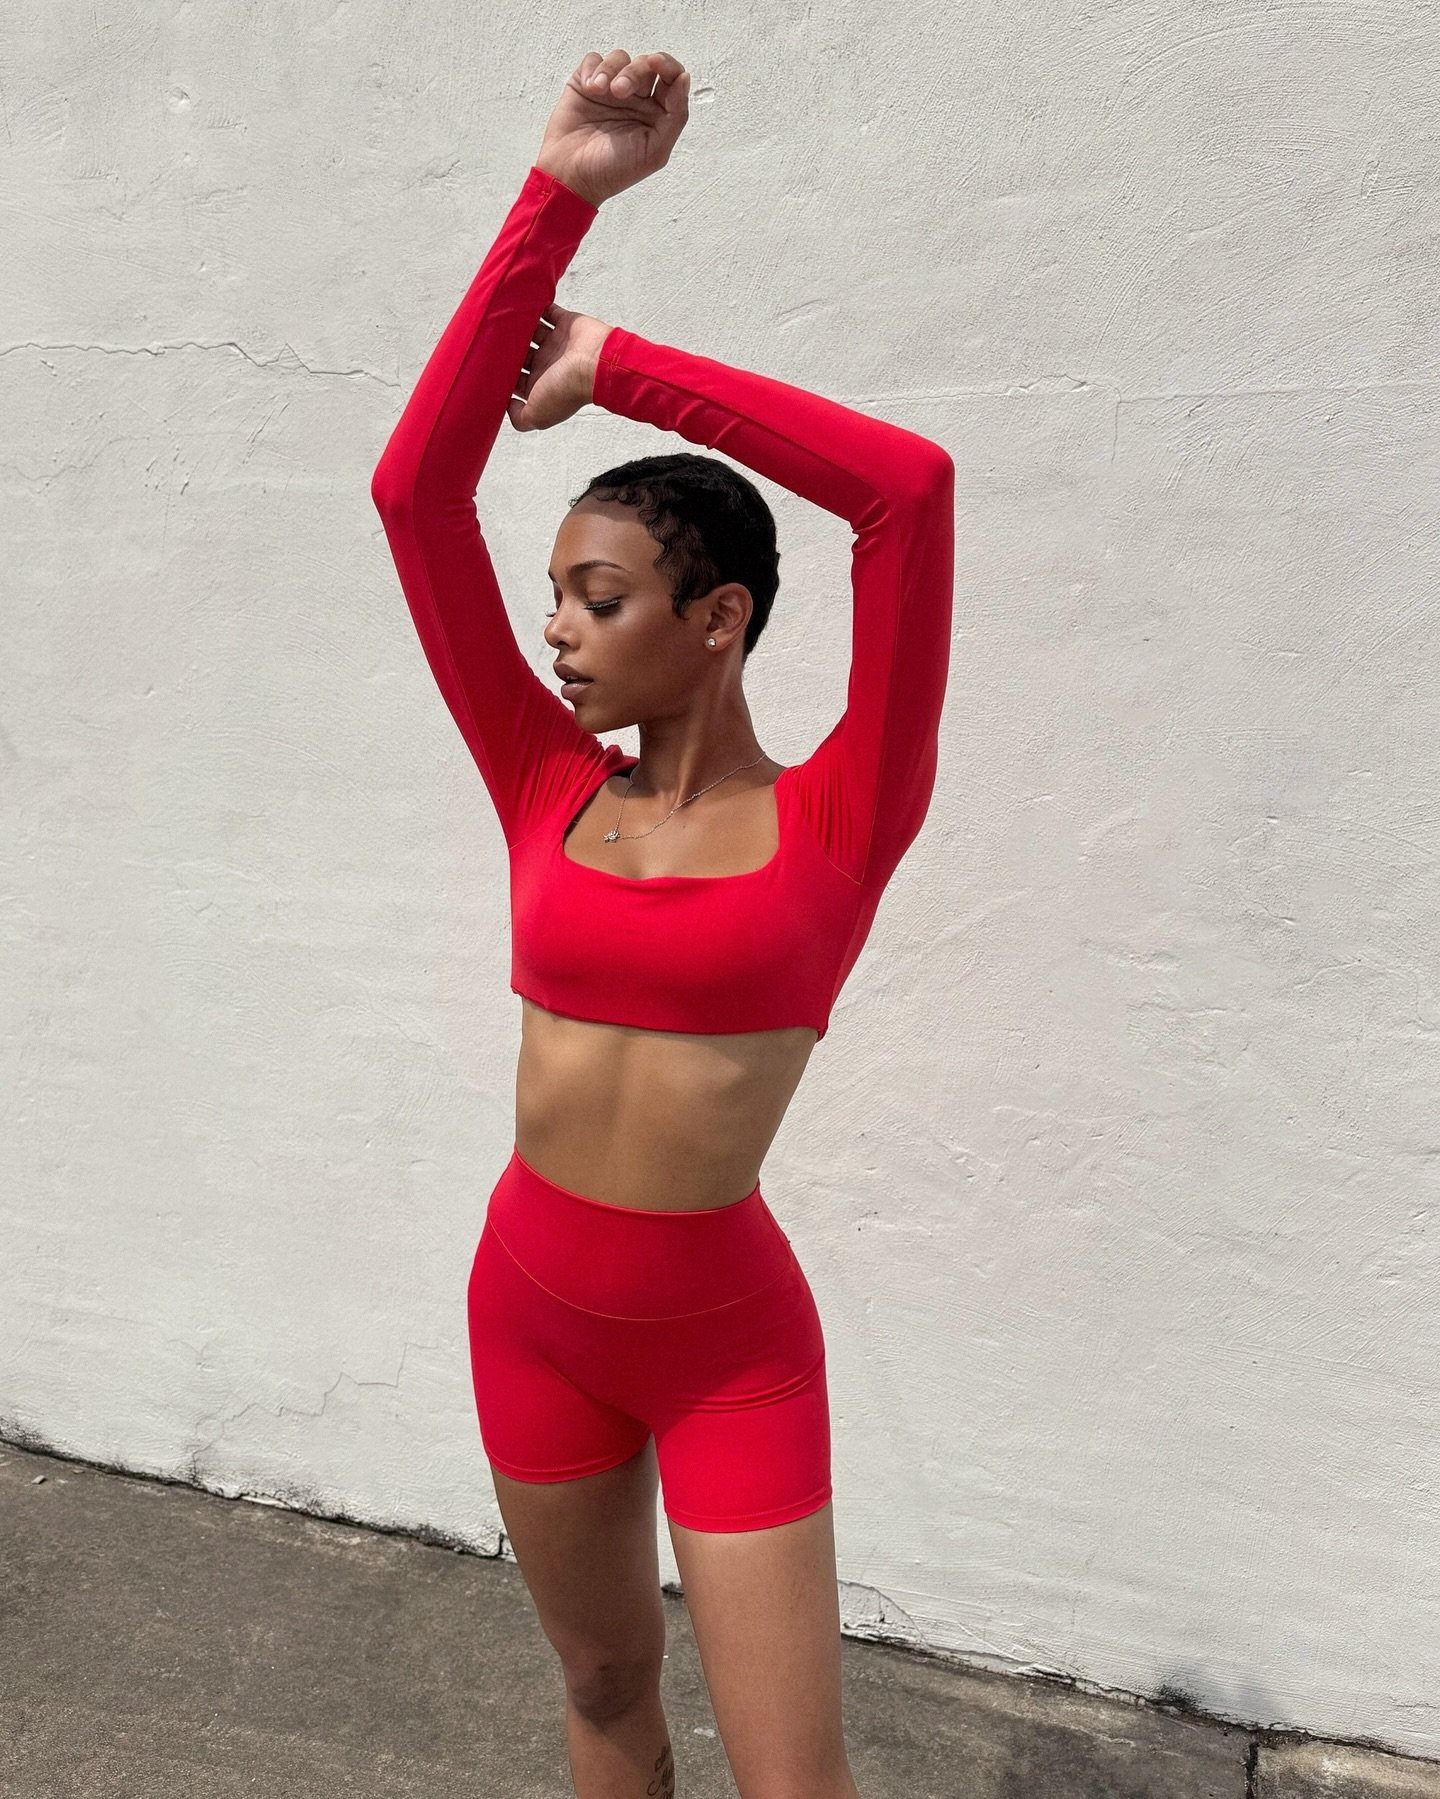 Red turns heads❤️ New Arrivals✨

🛍️deefitnesscollection.com

#deefit #deefitness #deefitcollection #workout #workoutclothes #gymbae #shopnow #essentials #everydayessentials #gymclothes #gymfits #shop #houstonwomenboutique #boutique #localpickup